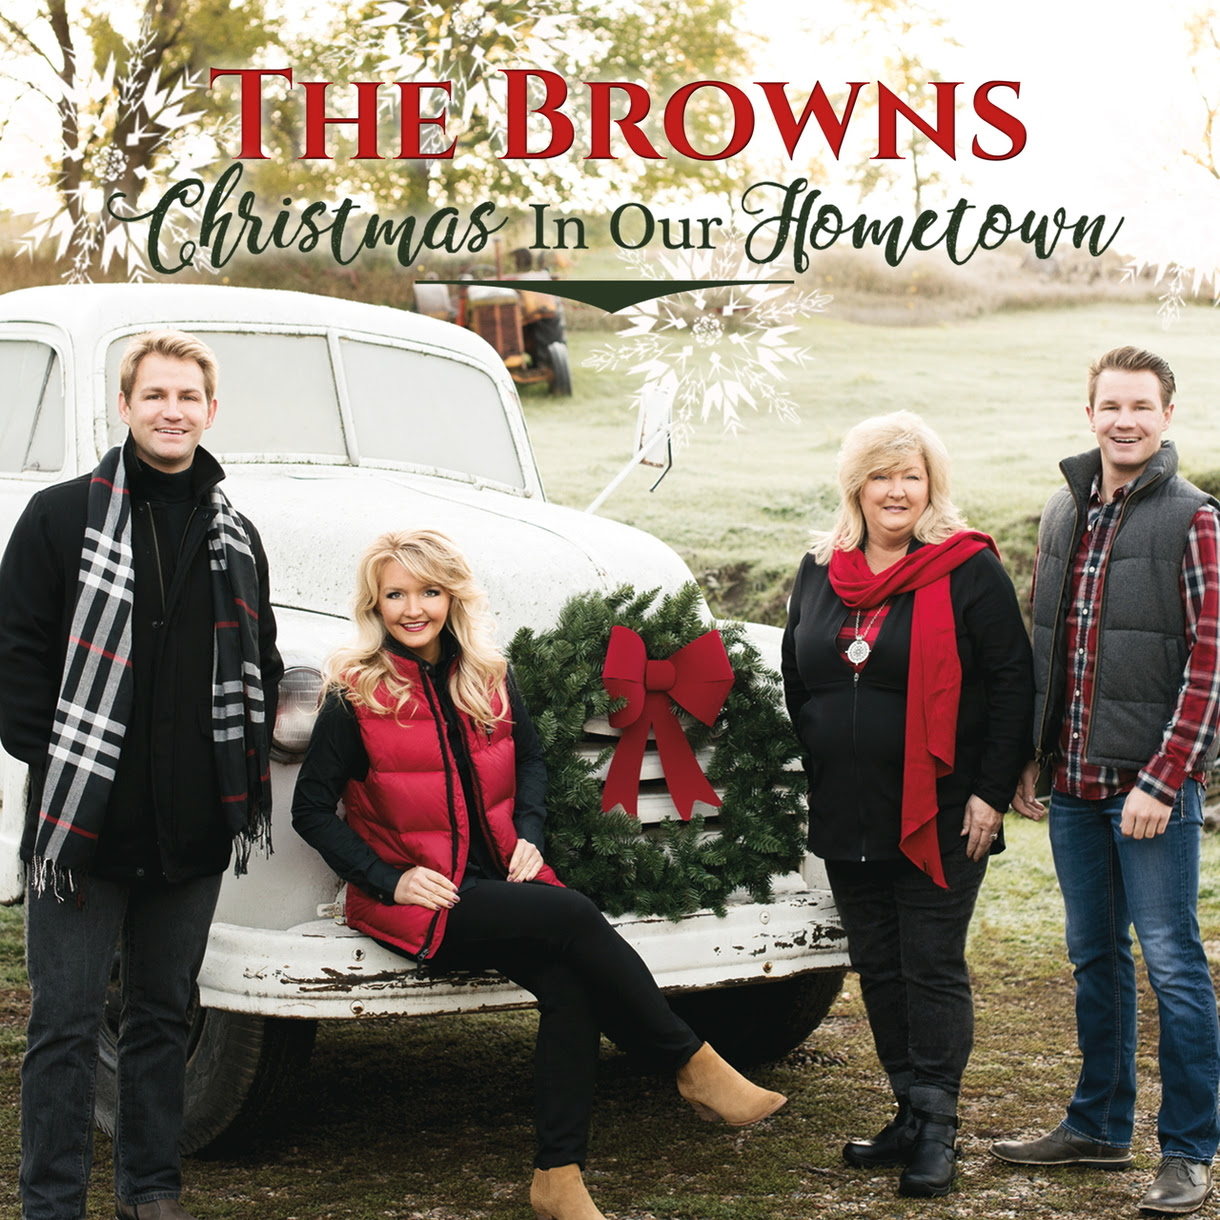 POPULAR FAMILY GROUP, THE BROWNS, RELEASE NEW CHRISTMAS RECORDING